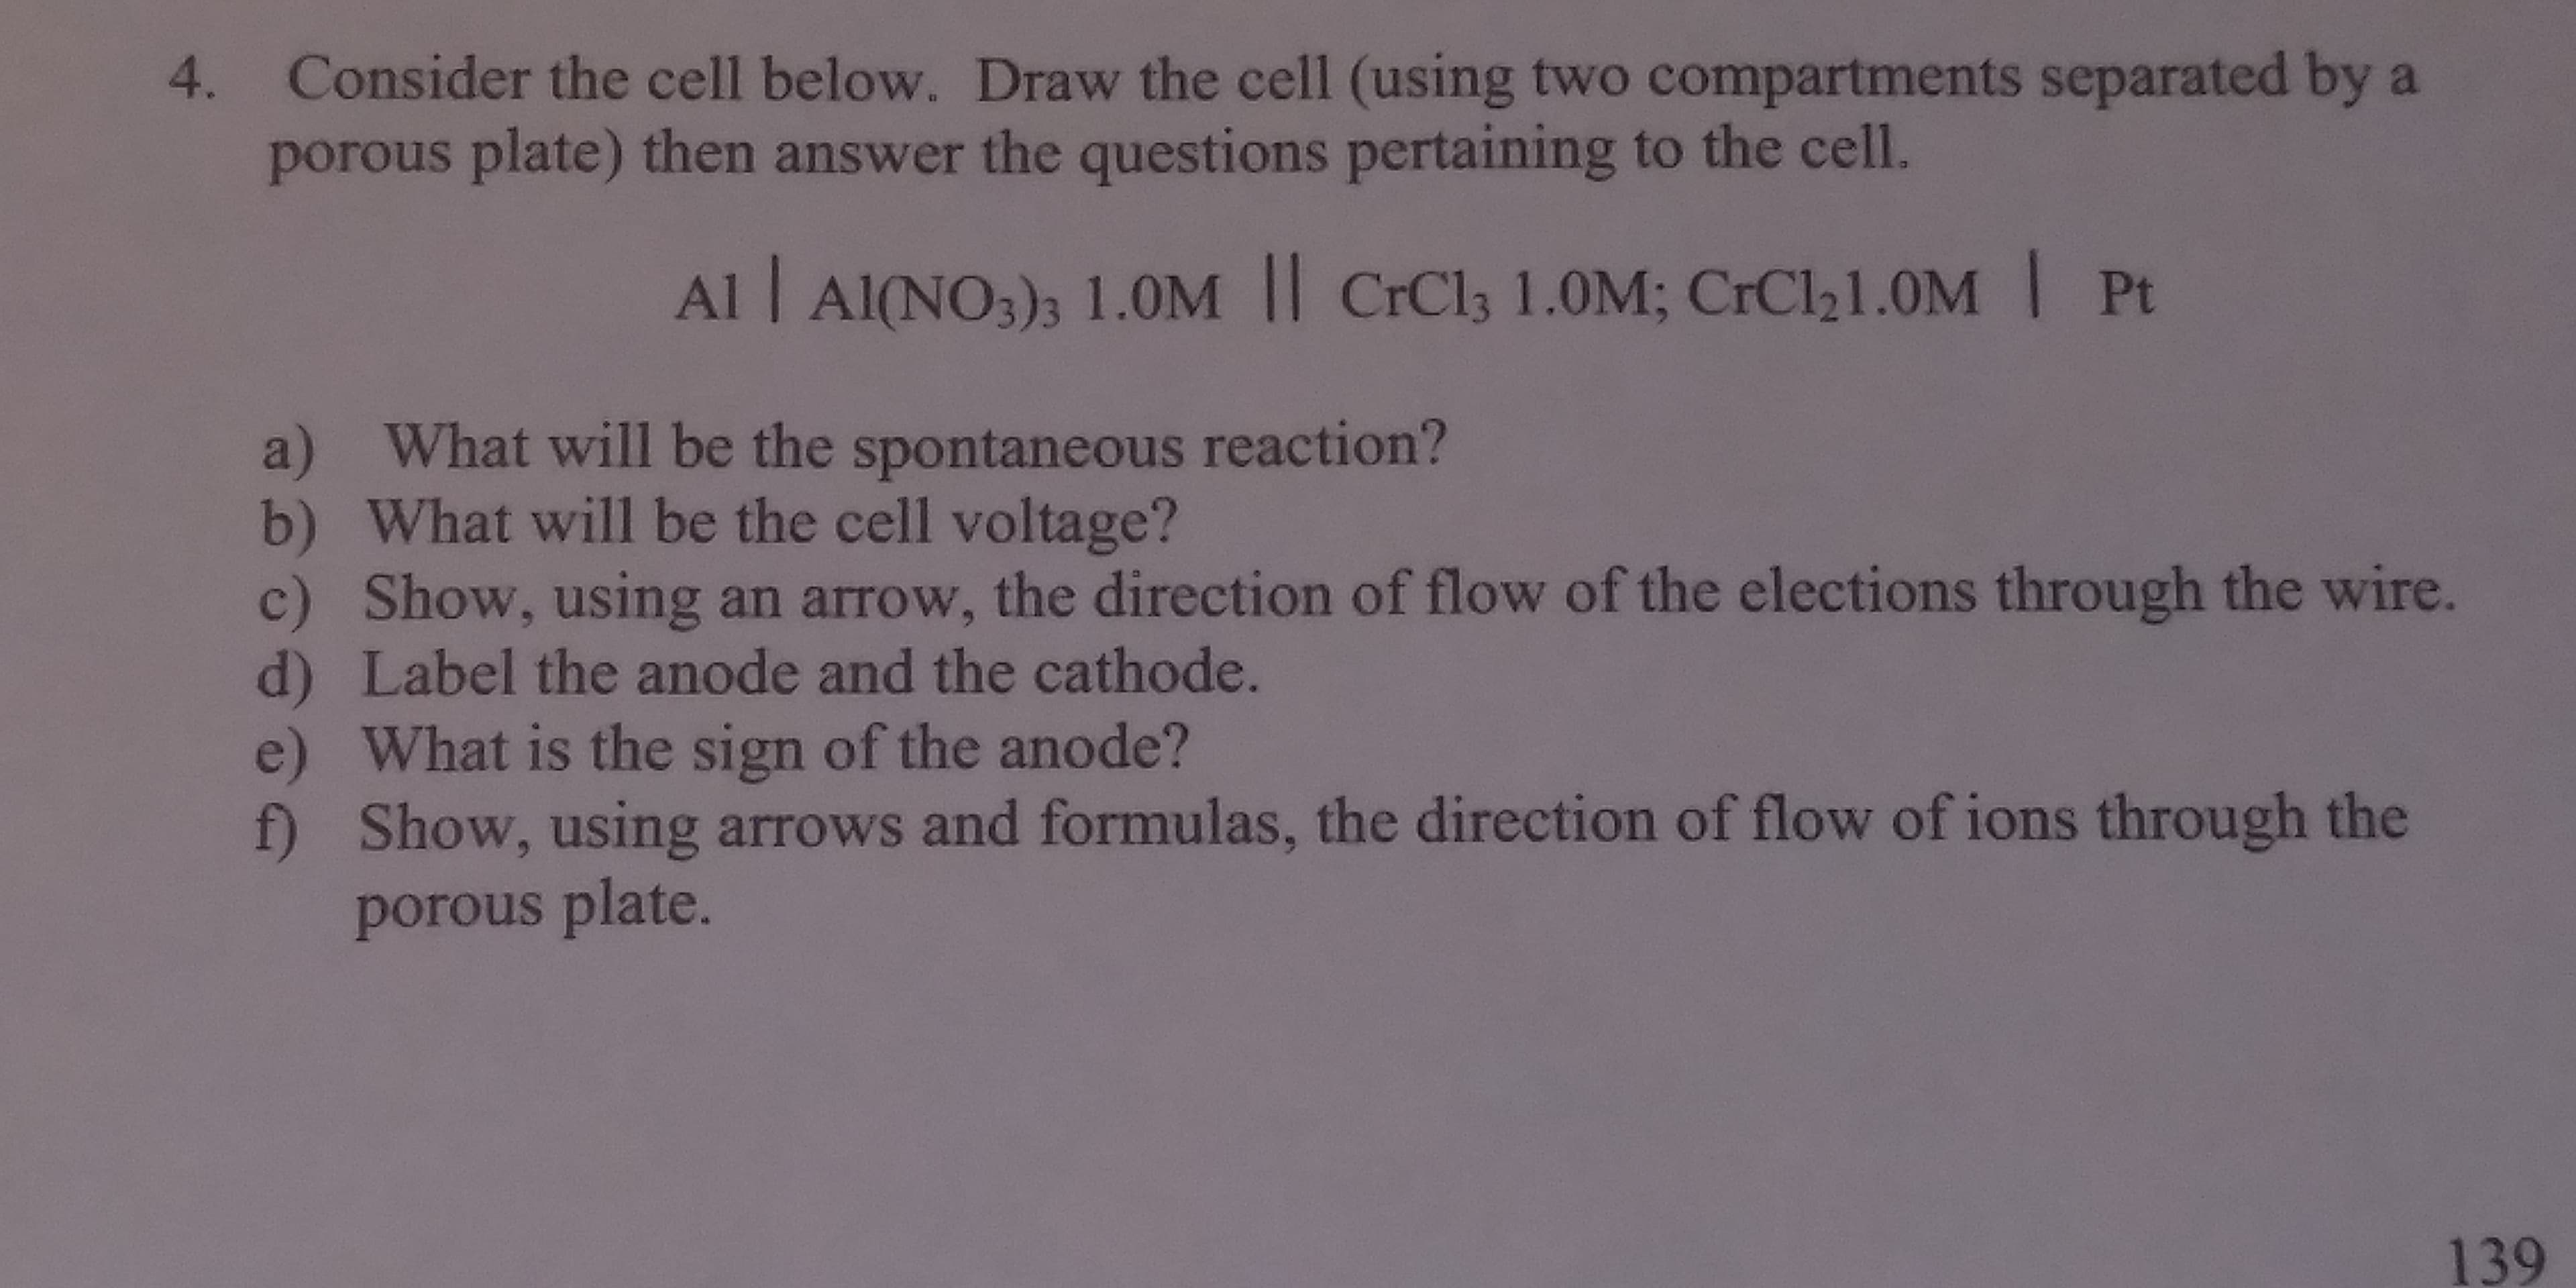 Consider the cell below. Draw the cell (using two compartments separated by a
porous plate) then answer the questions pertaining to the cell.
4.
Al I AIONO)s 1.0M Il CrCls 1.0M; CrCl21.0M Pt
a) What will be the spontaneous reaction?
b) What will be the cell voltage?
c) Show, using an arrow, the direction of flow of the elections through the wire
d) Label the anode and the cathode.
e) What is the sign of the anode?
f) Show, using arrows and formulas, the direction of flow of ions through the
porous plate
139
